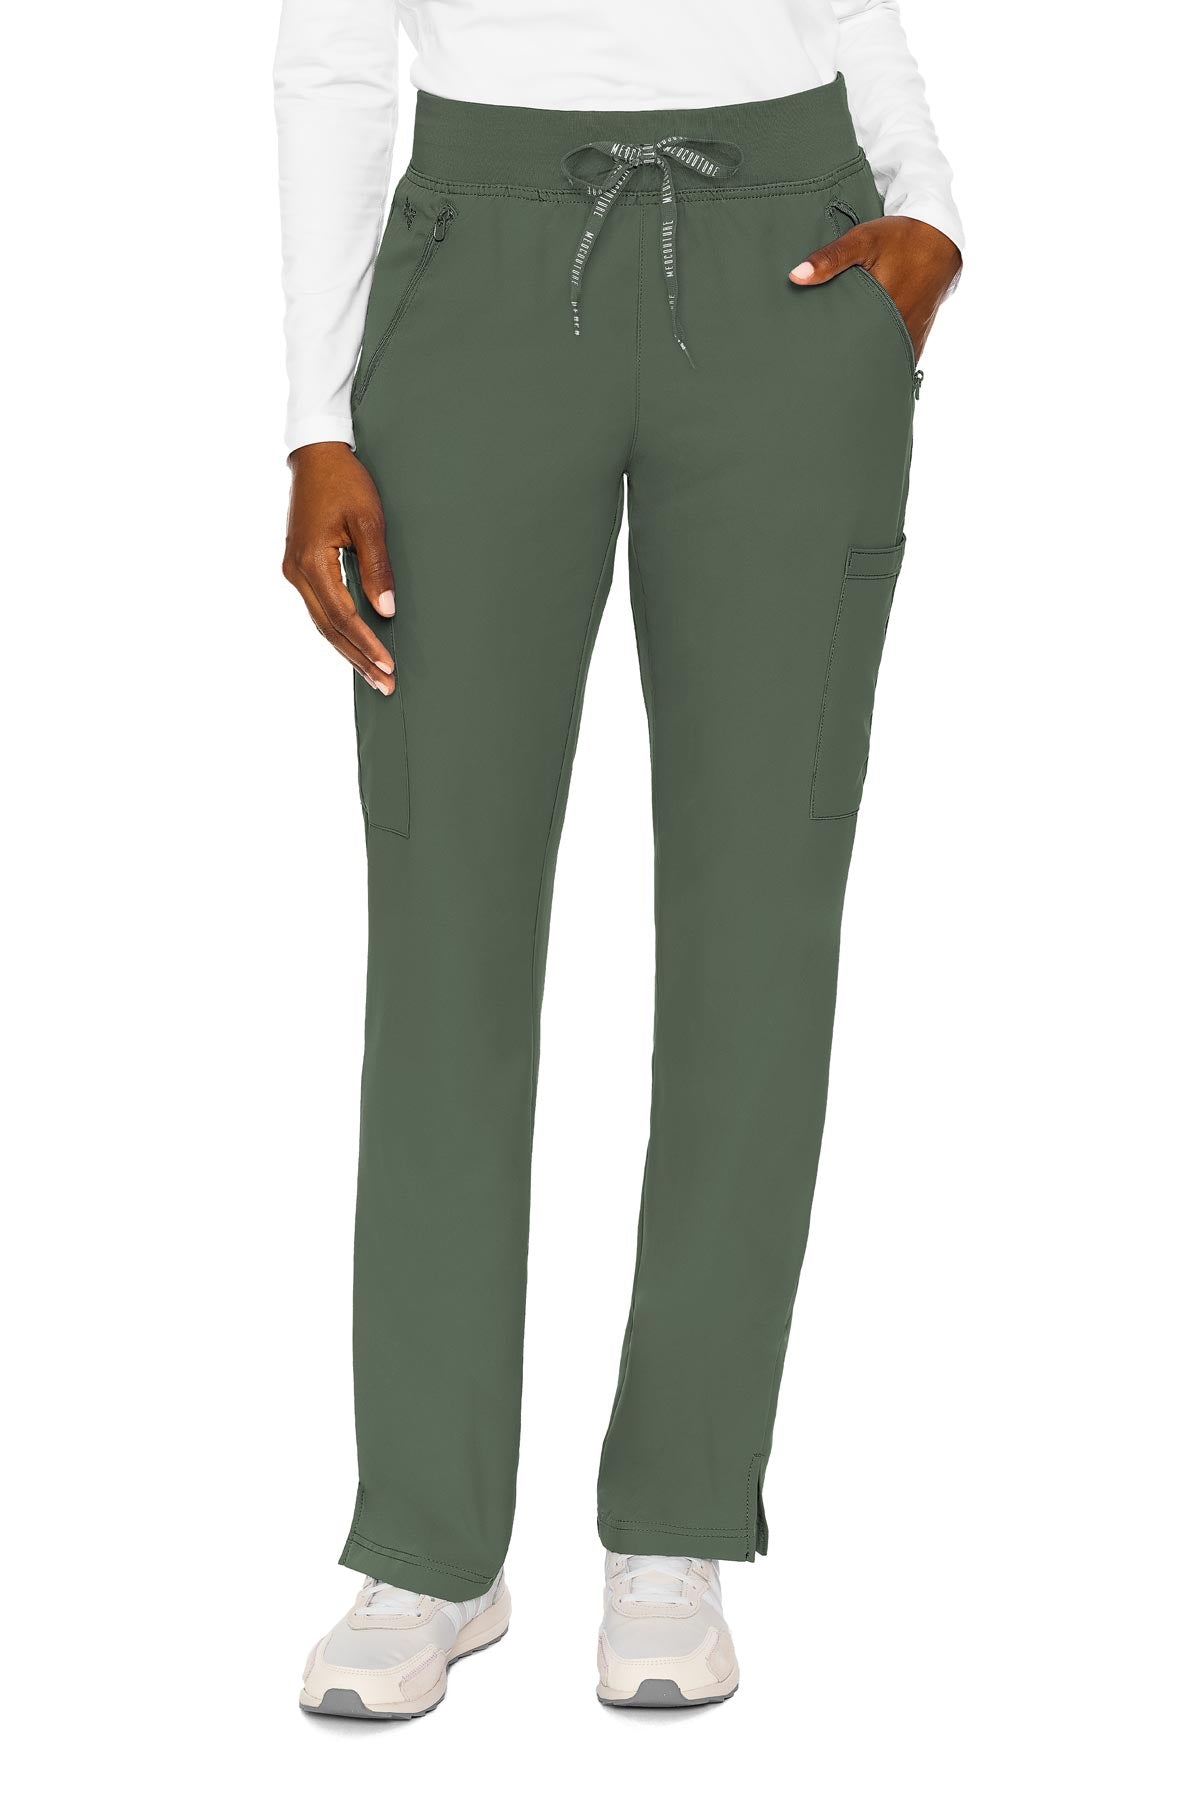 Med Couture Olive PANT